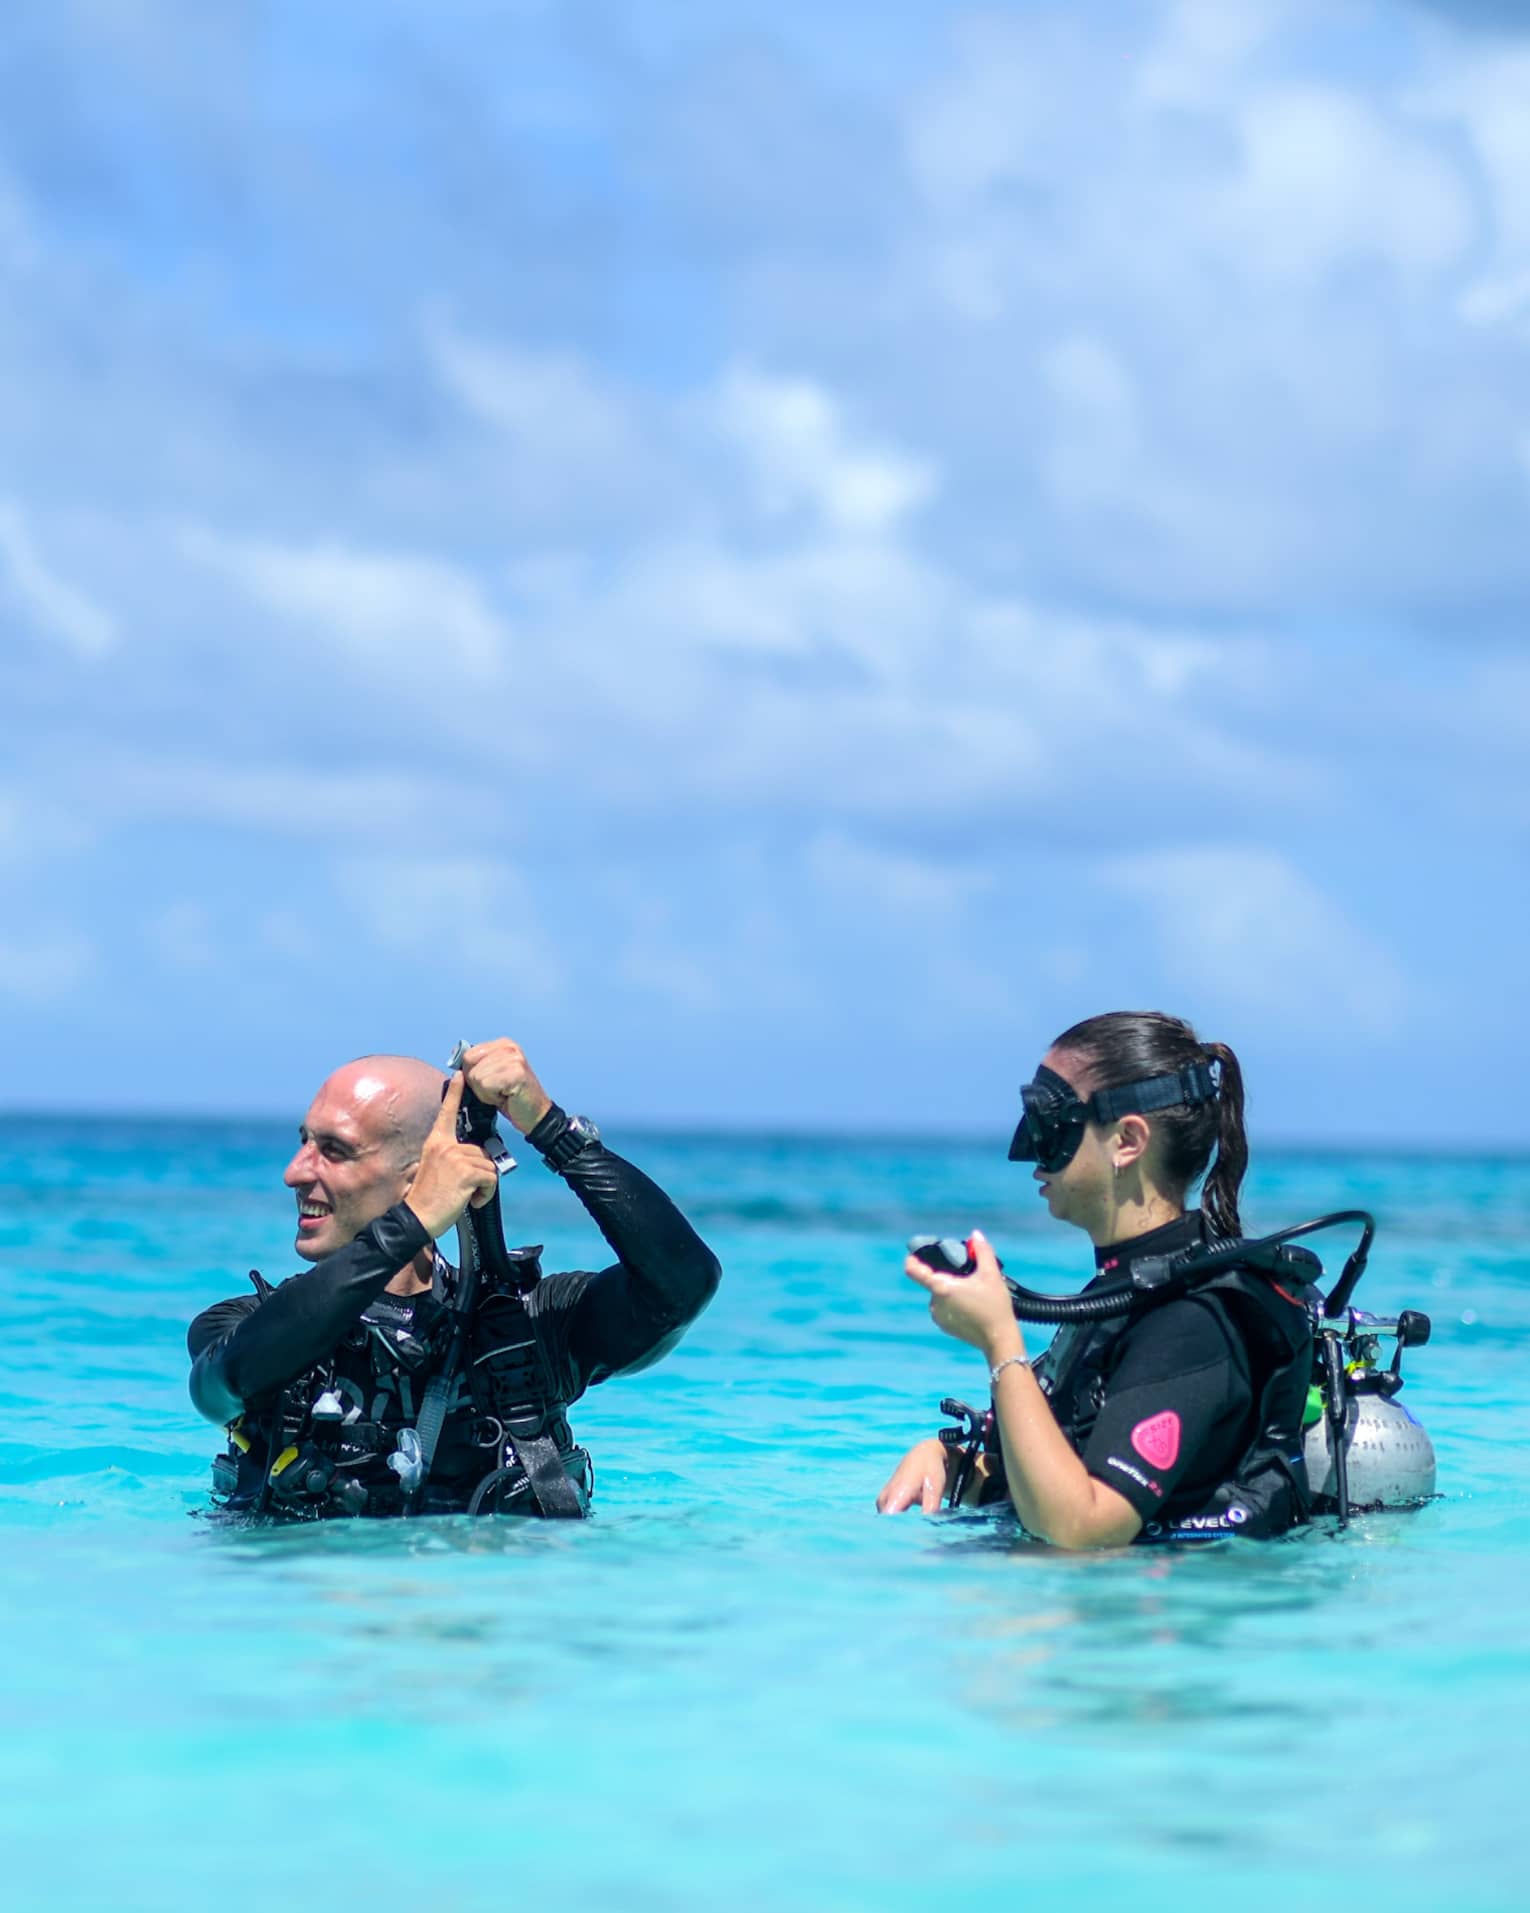 Scuba instructor showing mouthpiece to guest as they stand wearing scuba gear, chest-deep in azure water under fluffy clouds.